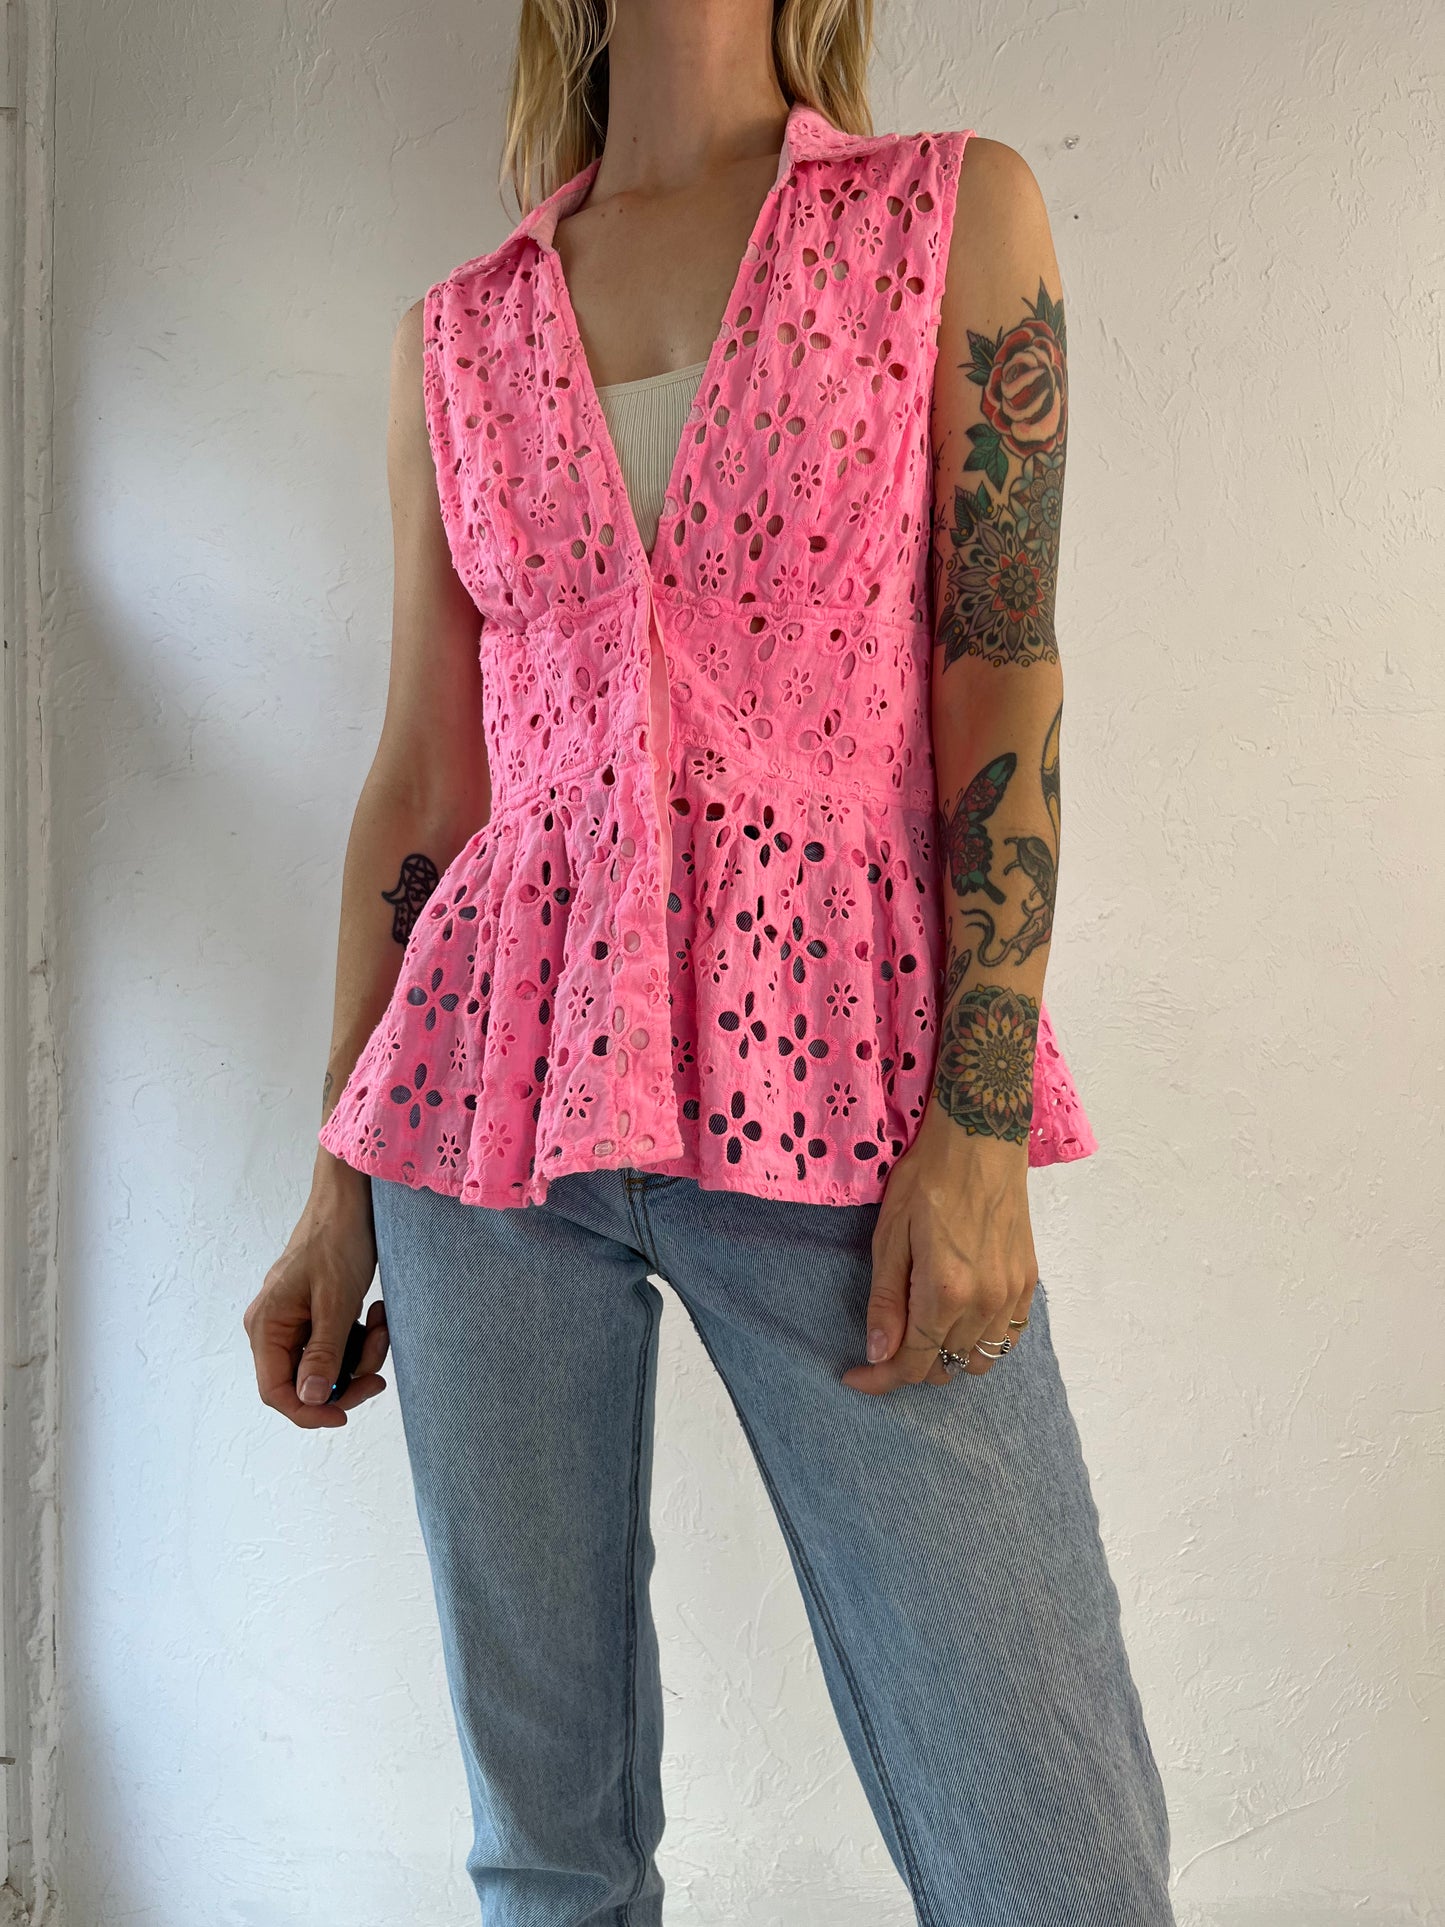 Y2k 'Guess' Hot Pink Flower Sleeveless Top / Large